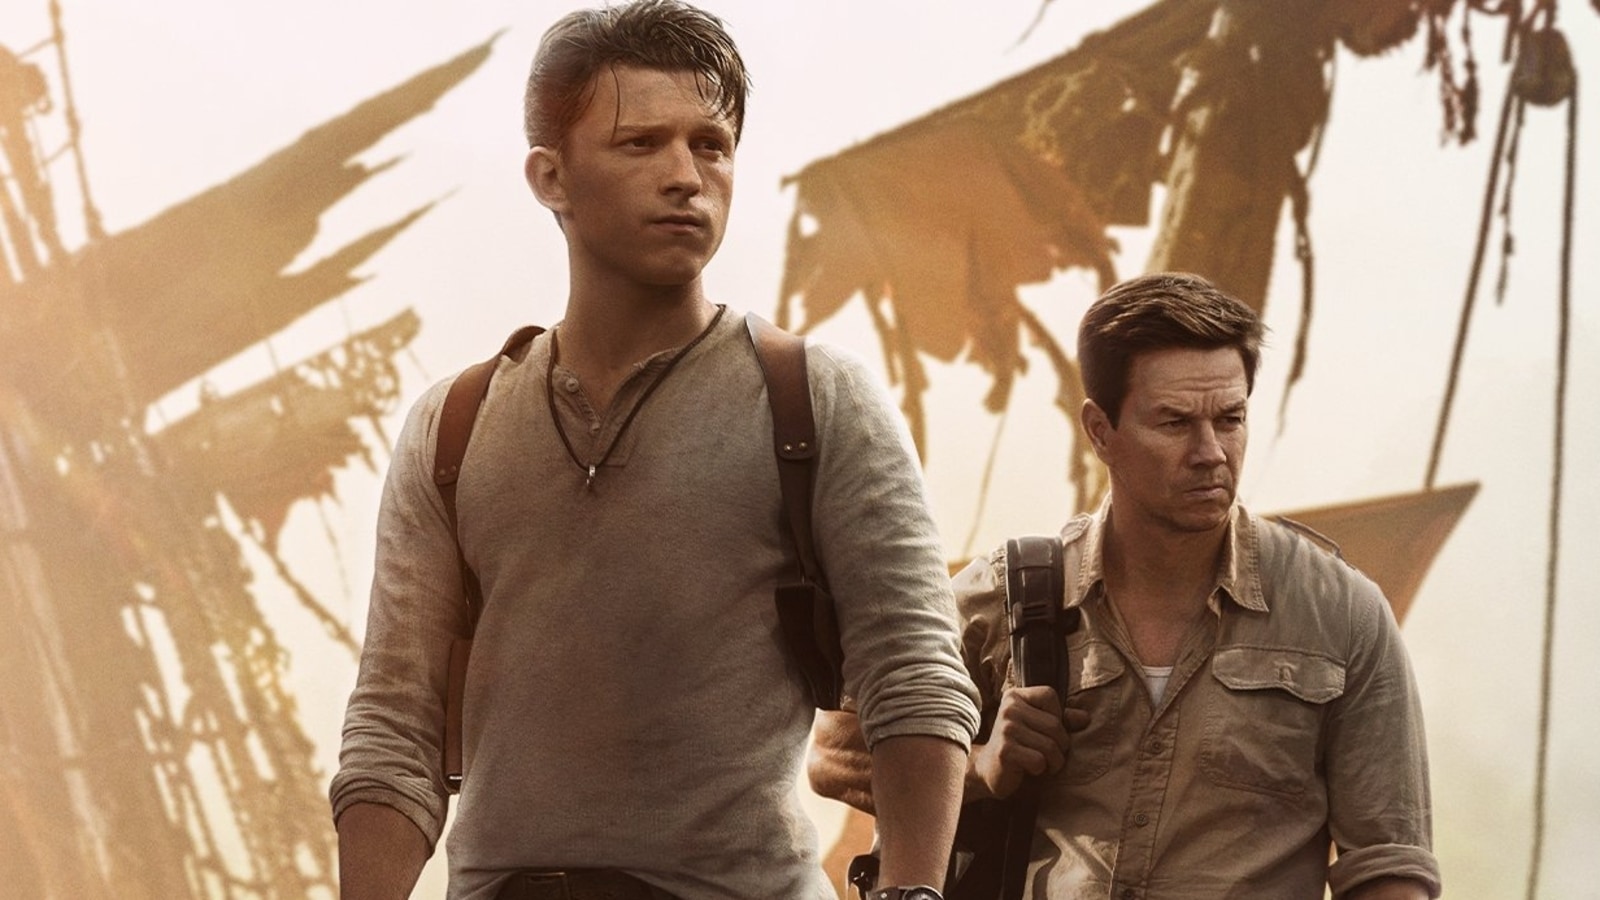 Uncharted Movie Starts Its International Box Office Run With $21.5